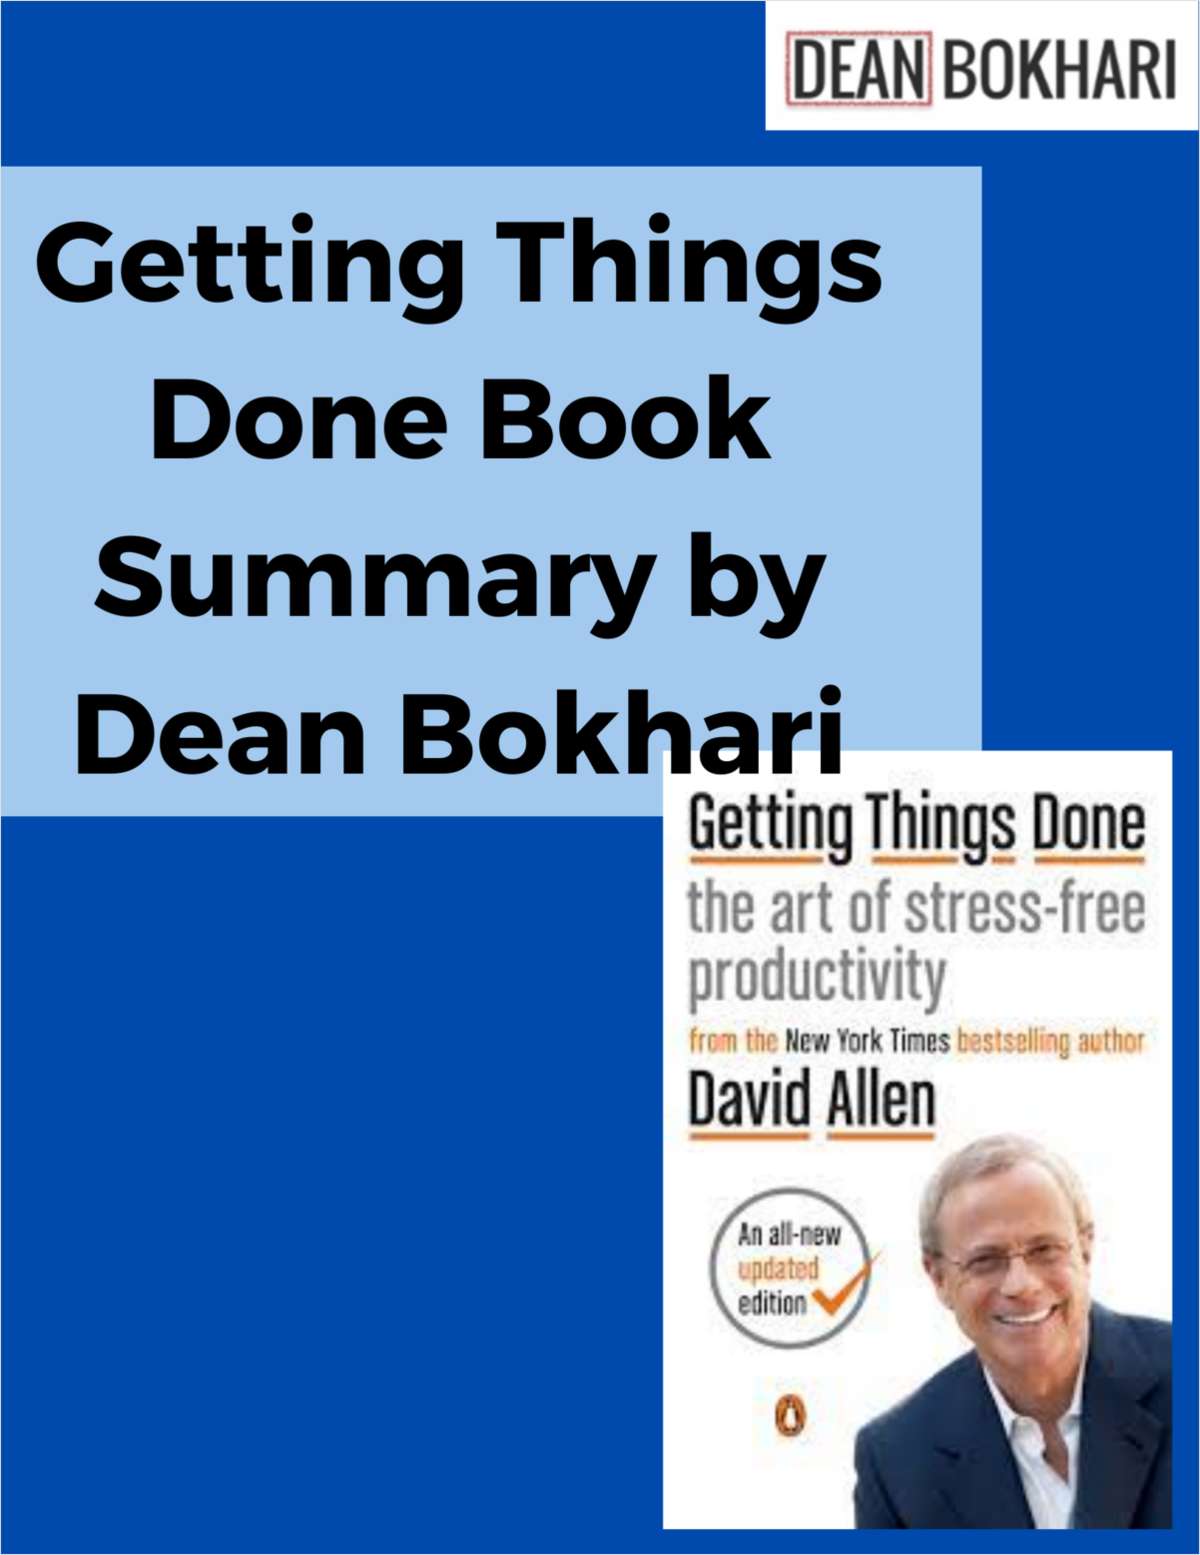 Getting Things Done by David Allen | Book Summary